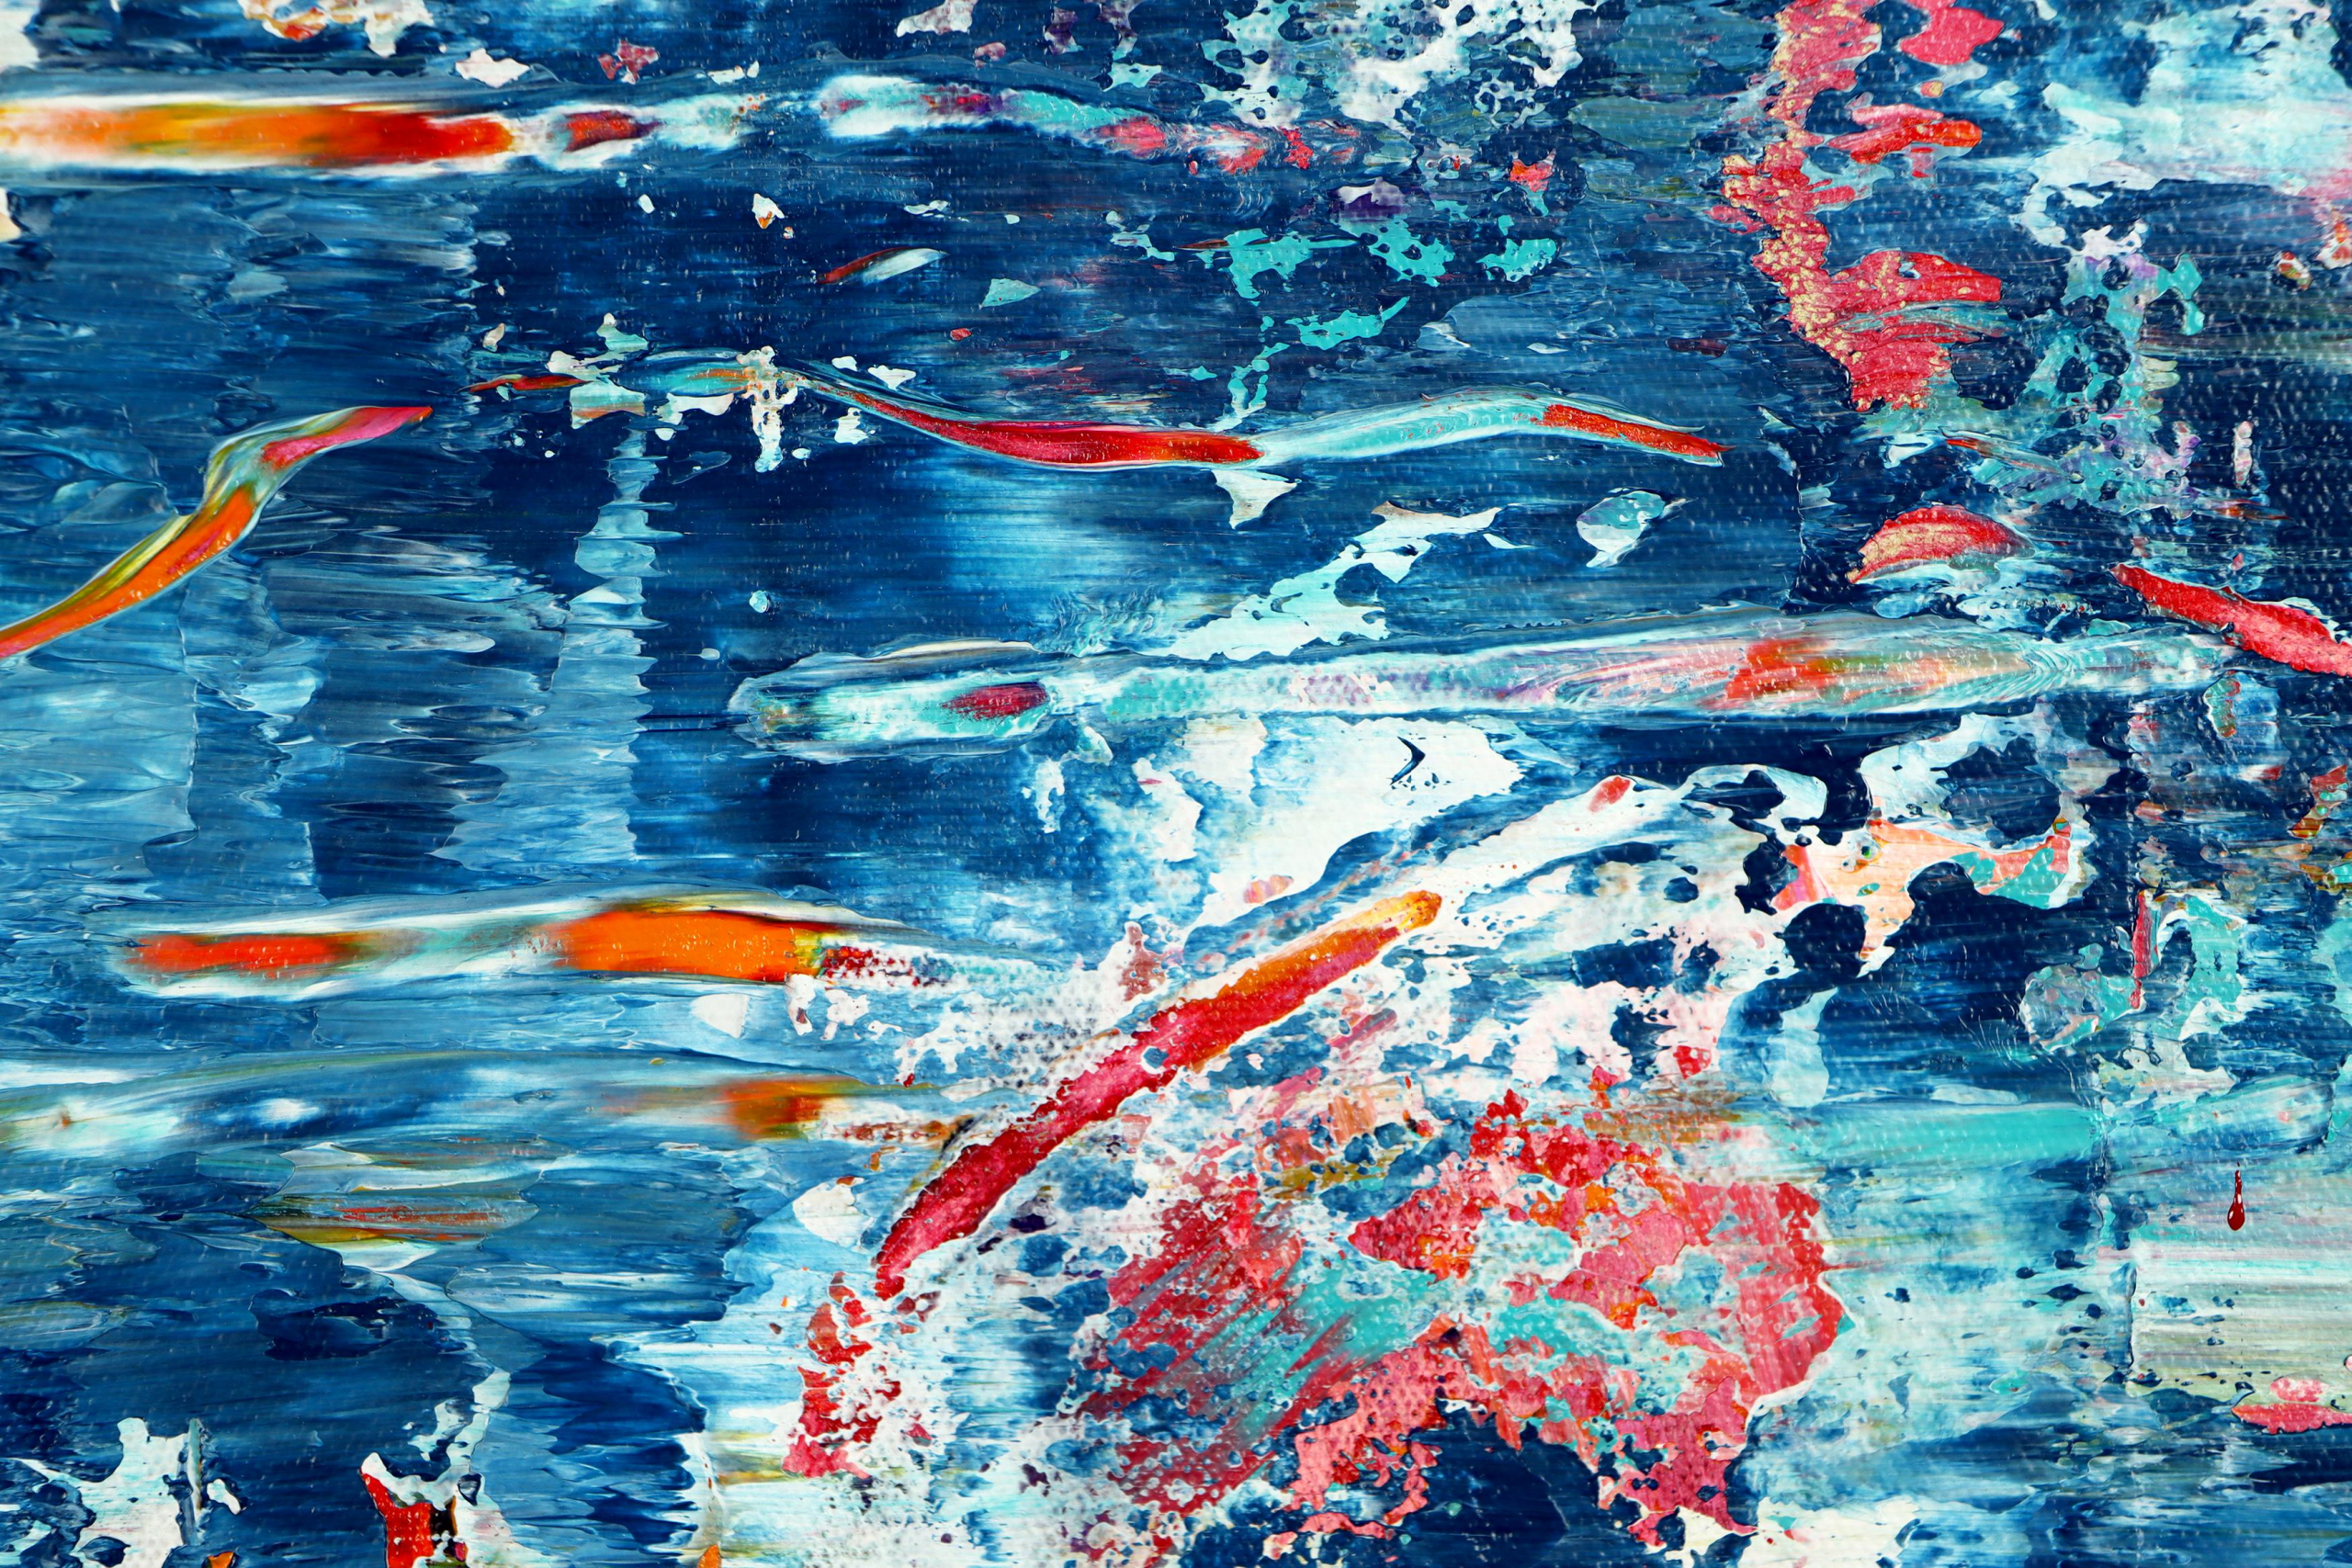 DETAIL / Azure Water (Coral and Ocean) (2021) by Nestor Toro / SOLD